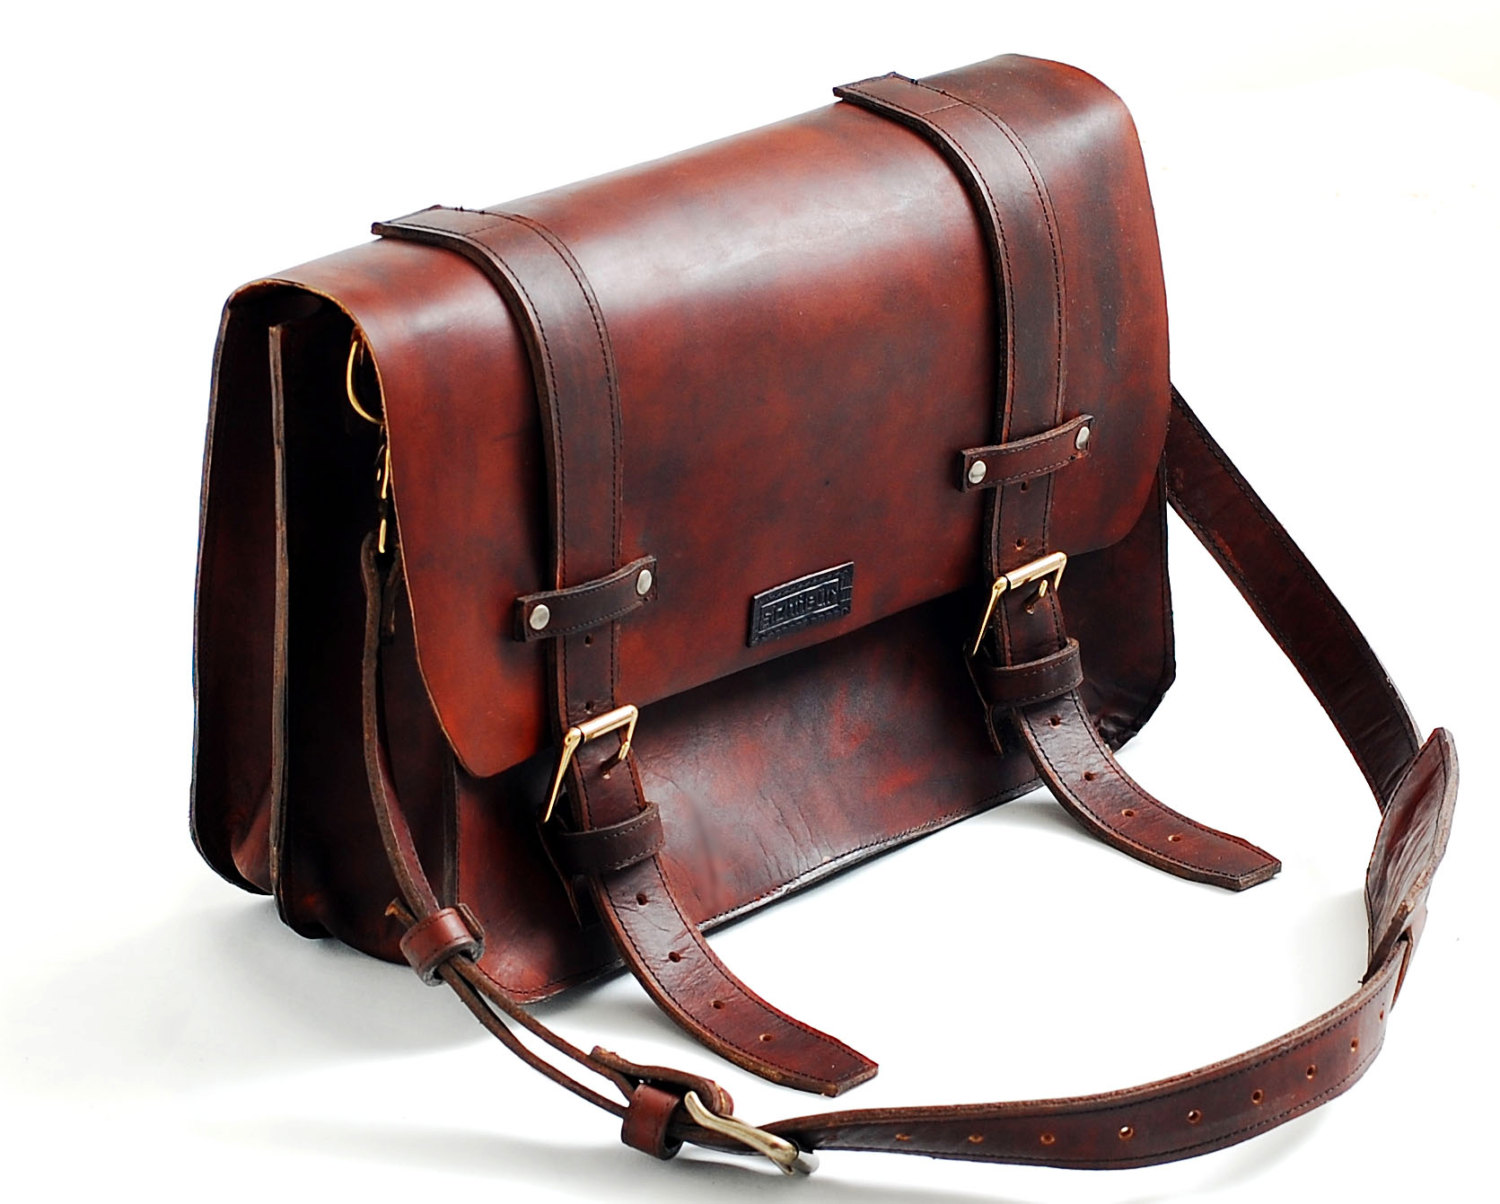 Leather Messenger Bag Briefcase. Time Resistance Leather Briefcase for